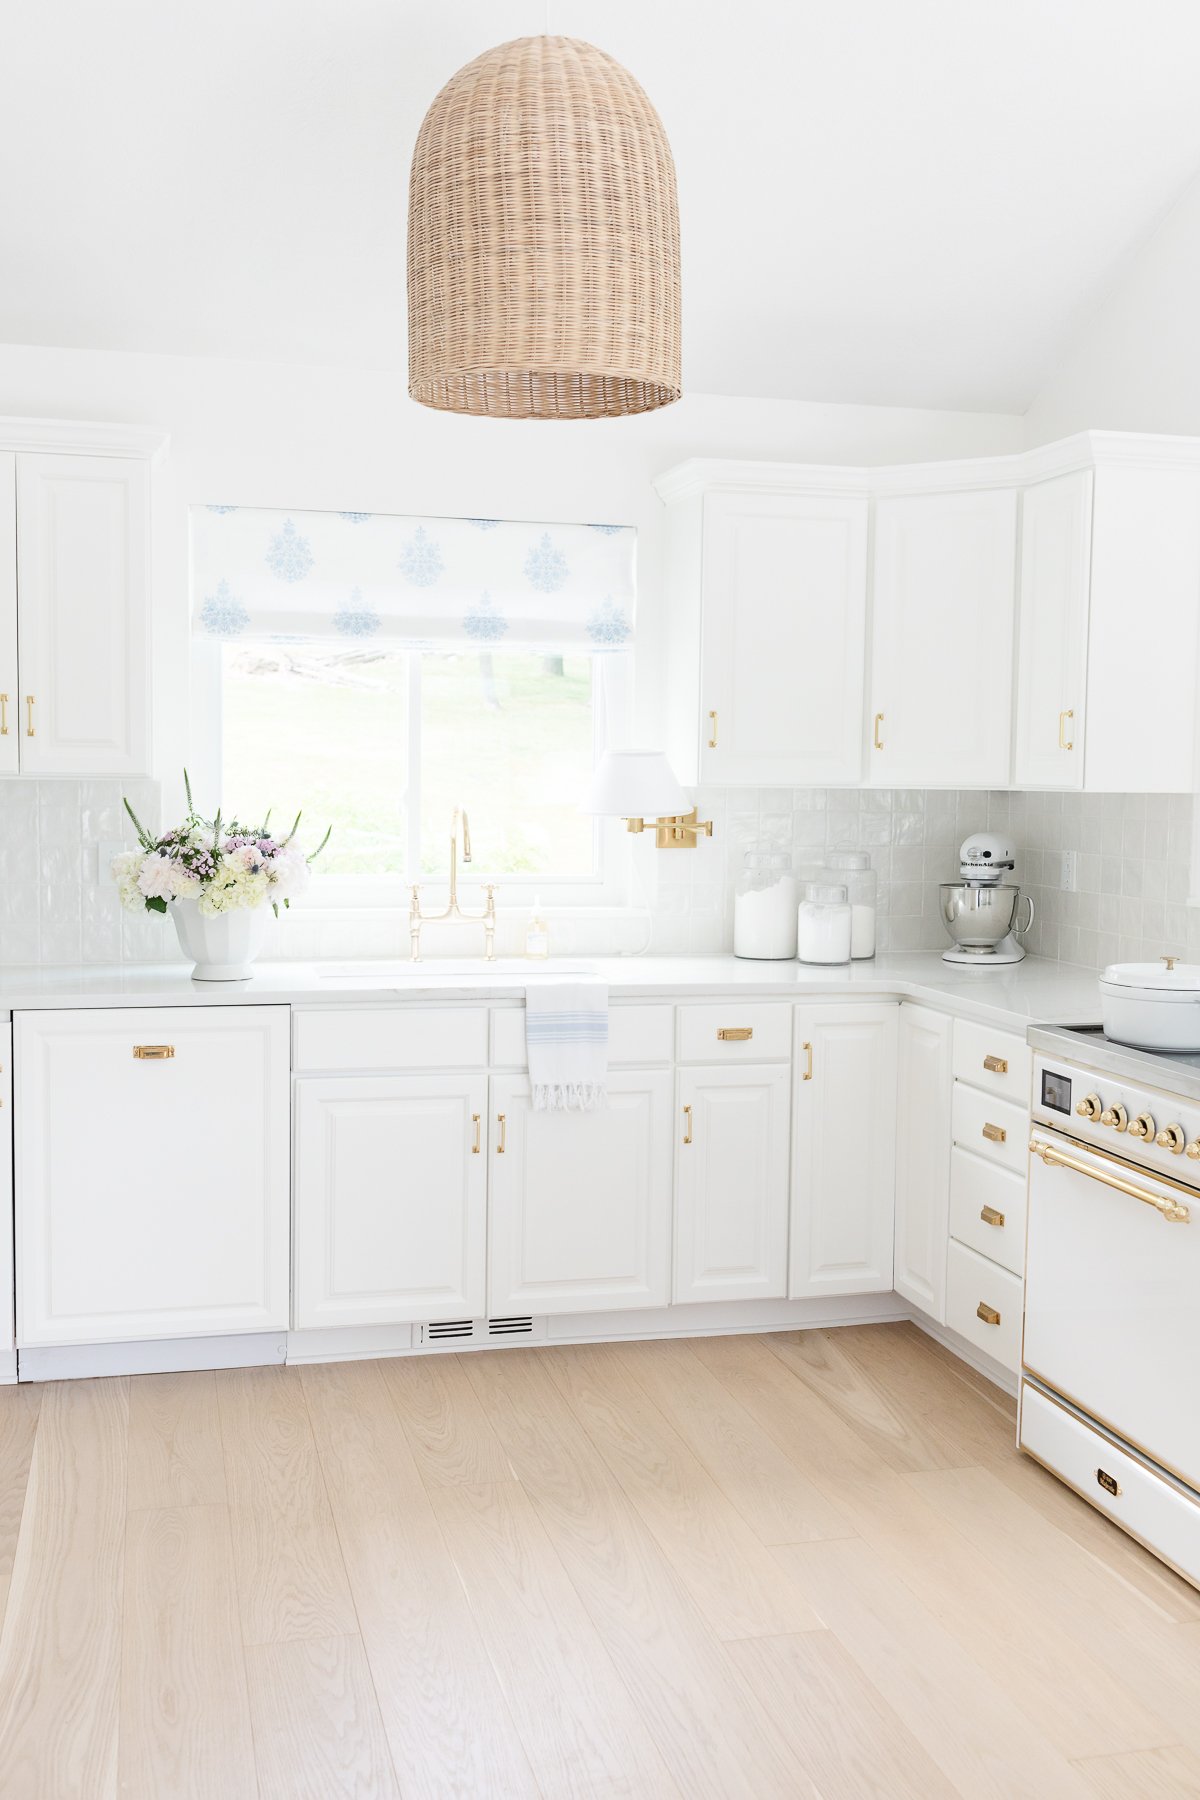 A bright, white kitchen features a wicker pendant light, white cabinets with brass handles, white oak floors, a bouquet of flowers on the counter, and a modern stove and mixer.